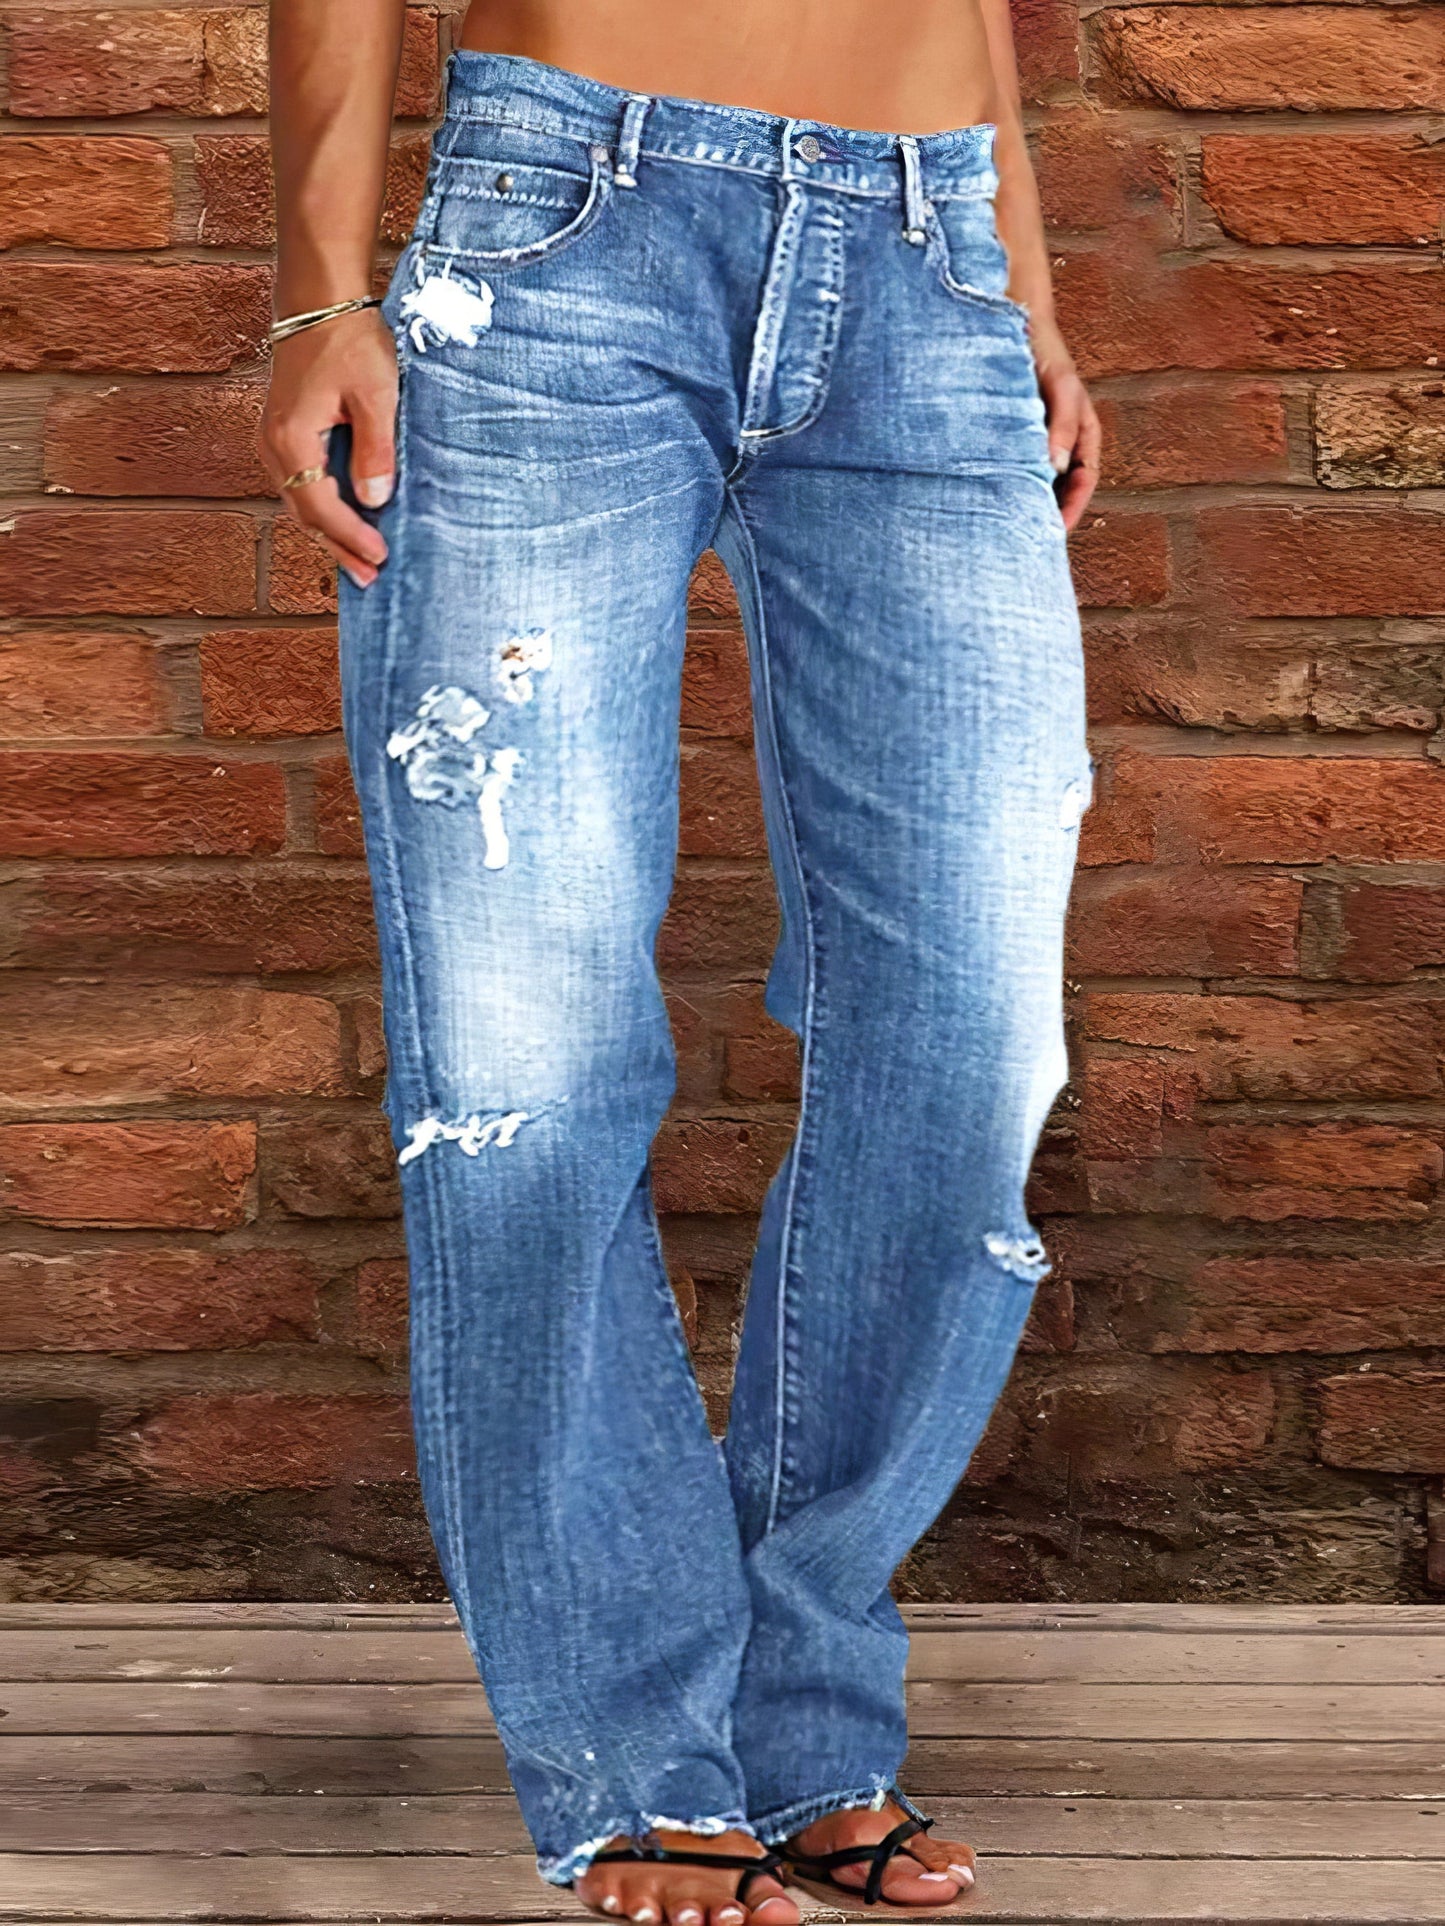 MsDressly Pants Stretch Ripped Washed Casual Straight Jeans DEN2210061242BLUS